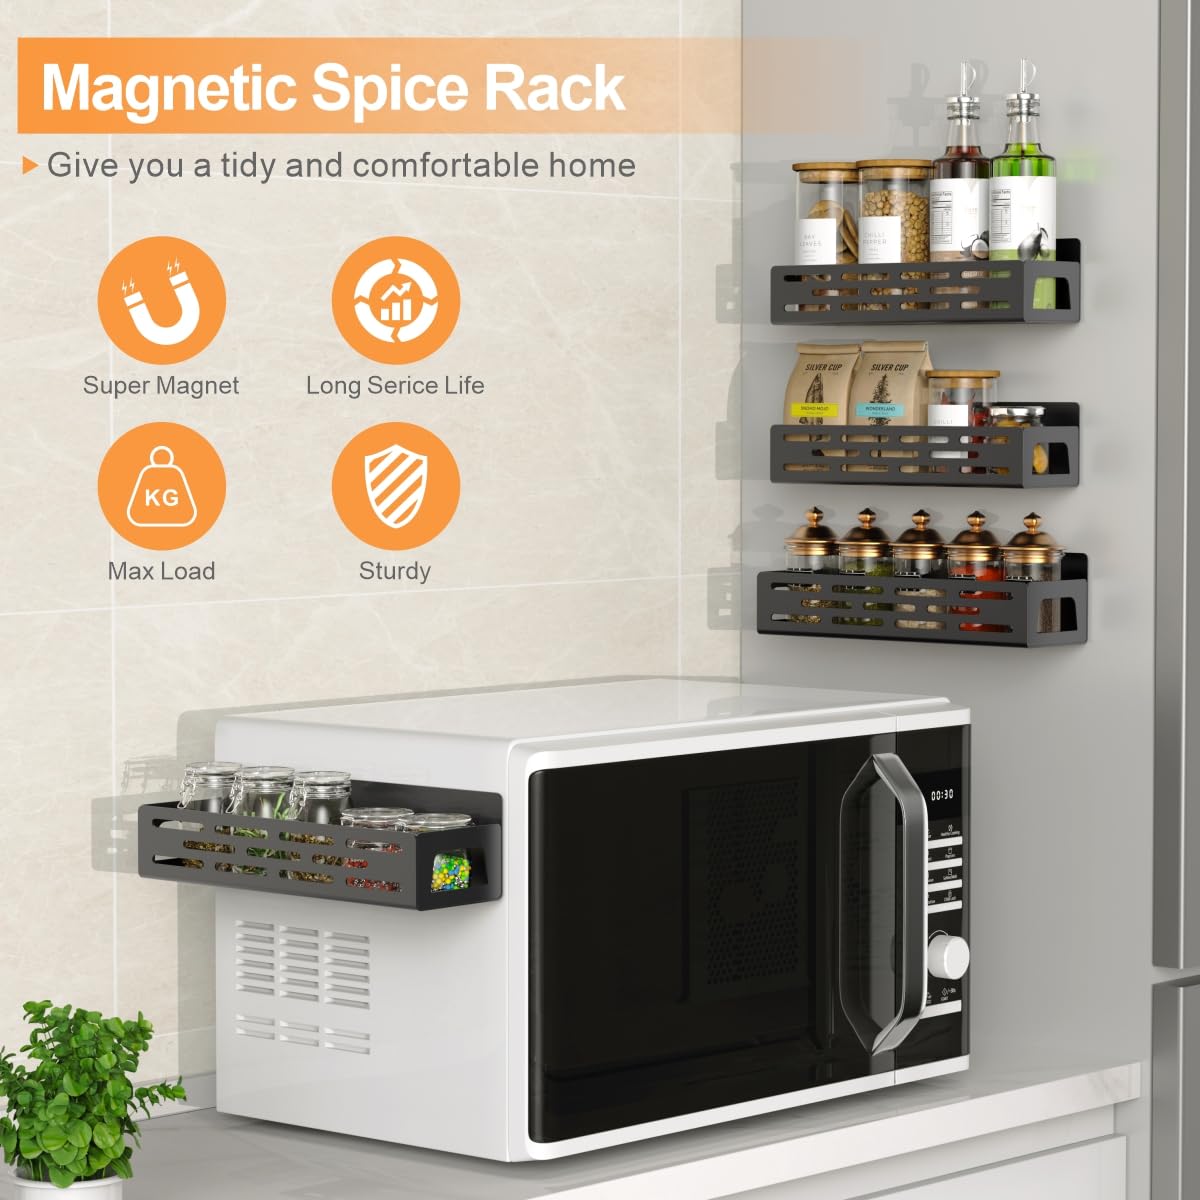 SPACWIS Magnetic Spice Rack Organizer for Refrigerator, 4 Pack Moveable Strong Magnet Spice Shelf, Kitchen Super Magnetic Shelves for Saving Space, Black.